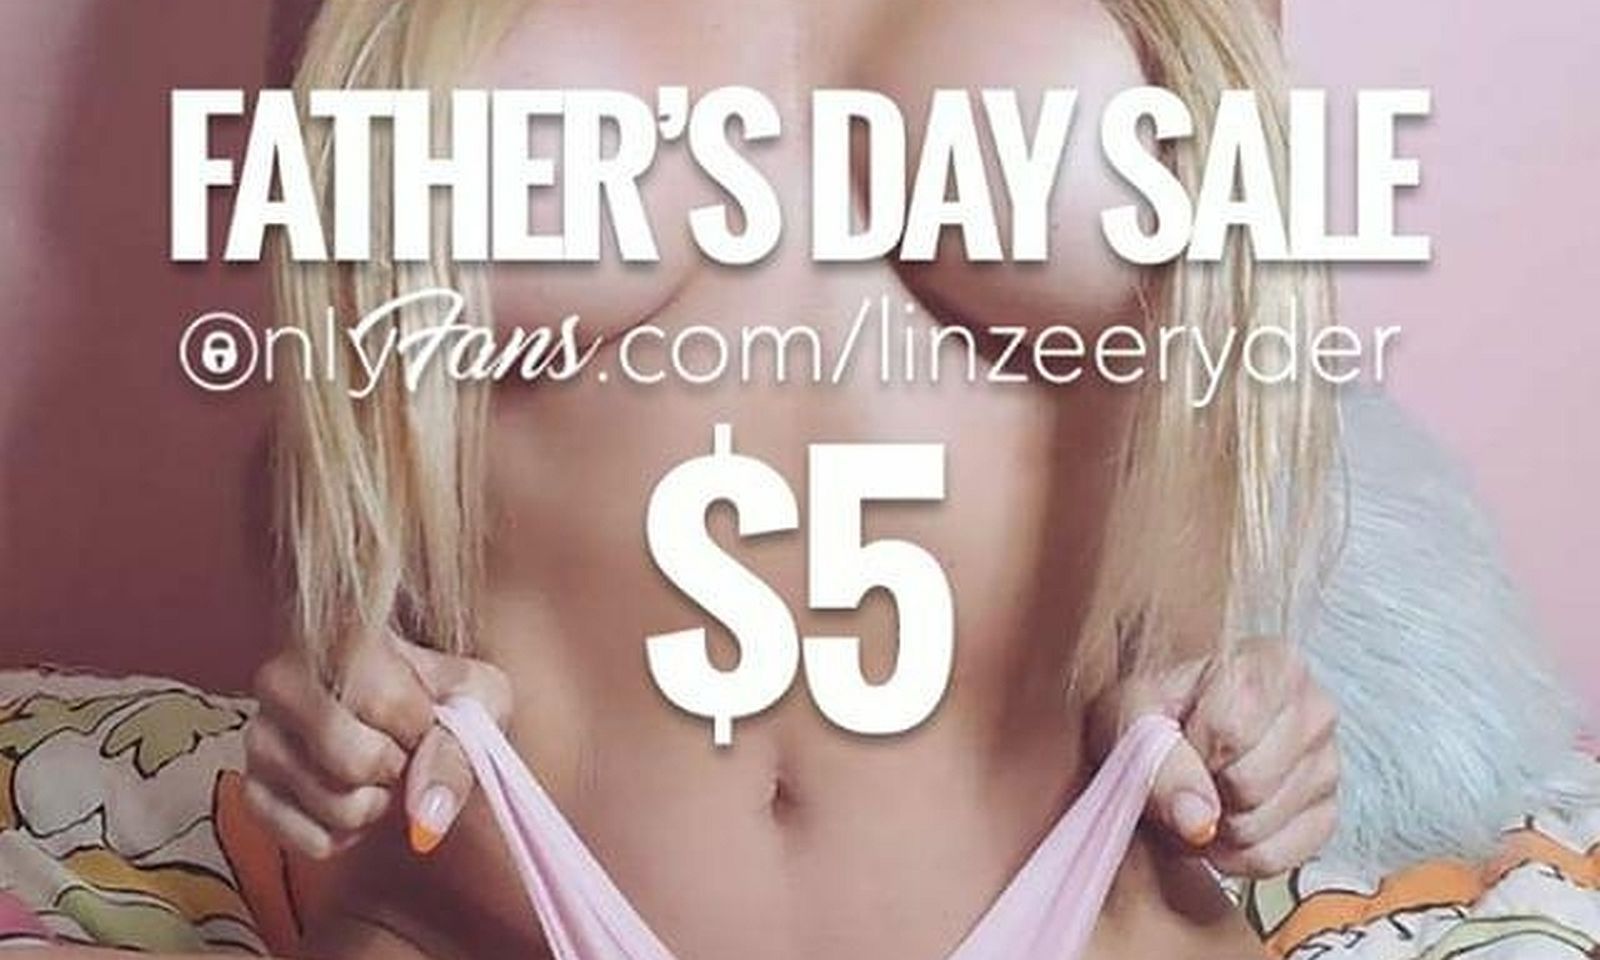 Linzee Ryder Has a $5 Father’s Day Sale on OnlyFans Now